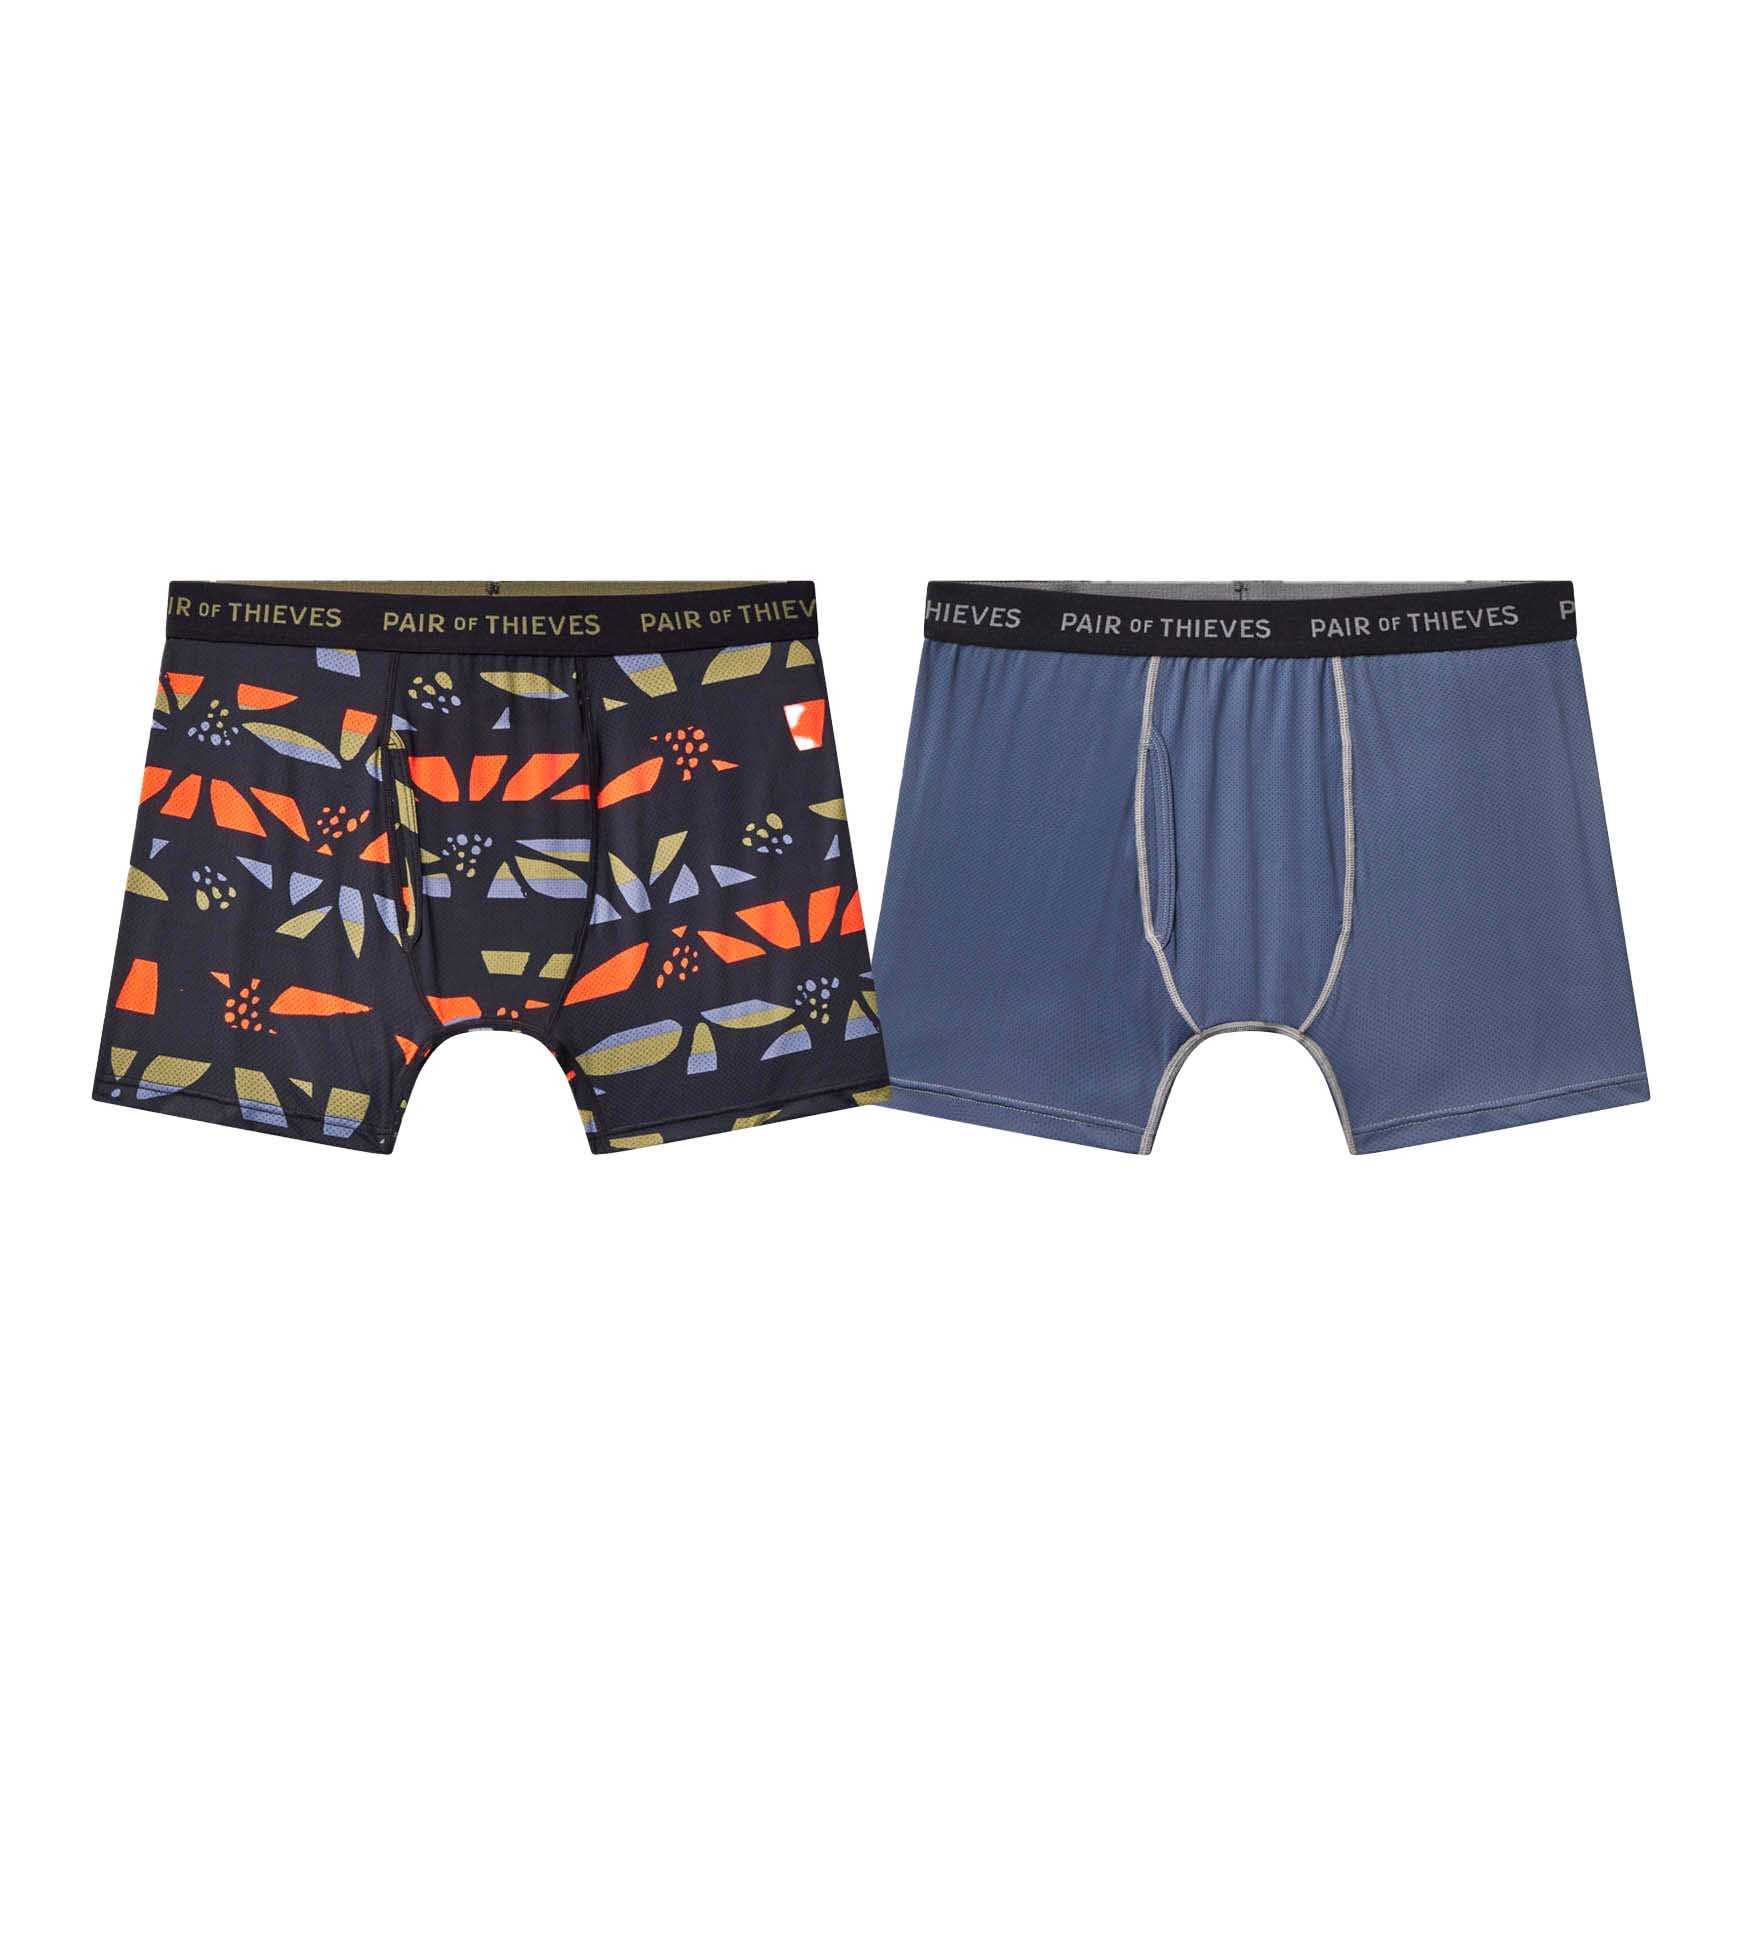 SuperFit Boxer Briefs 2 Pack Floral Glitch - Pair of Thieves